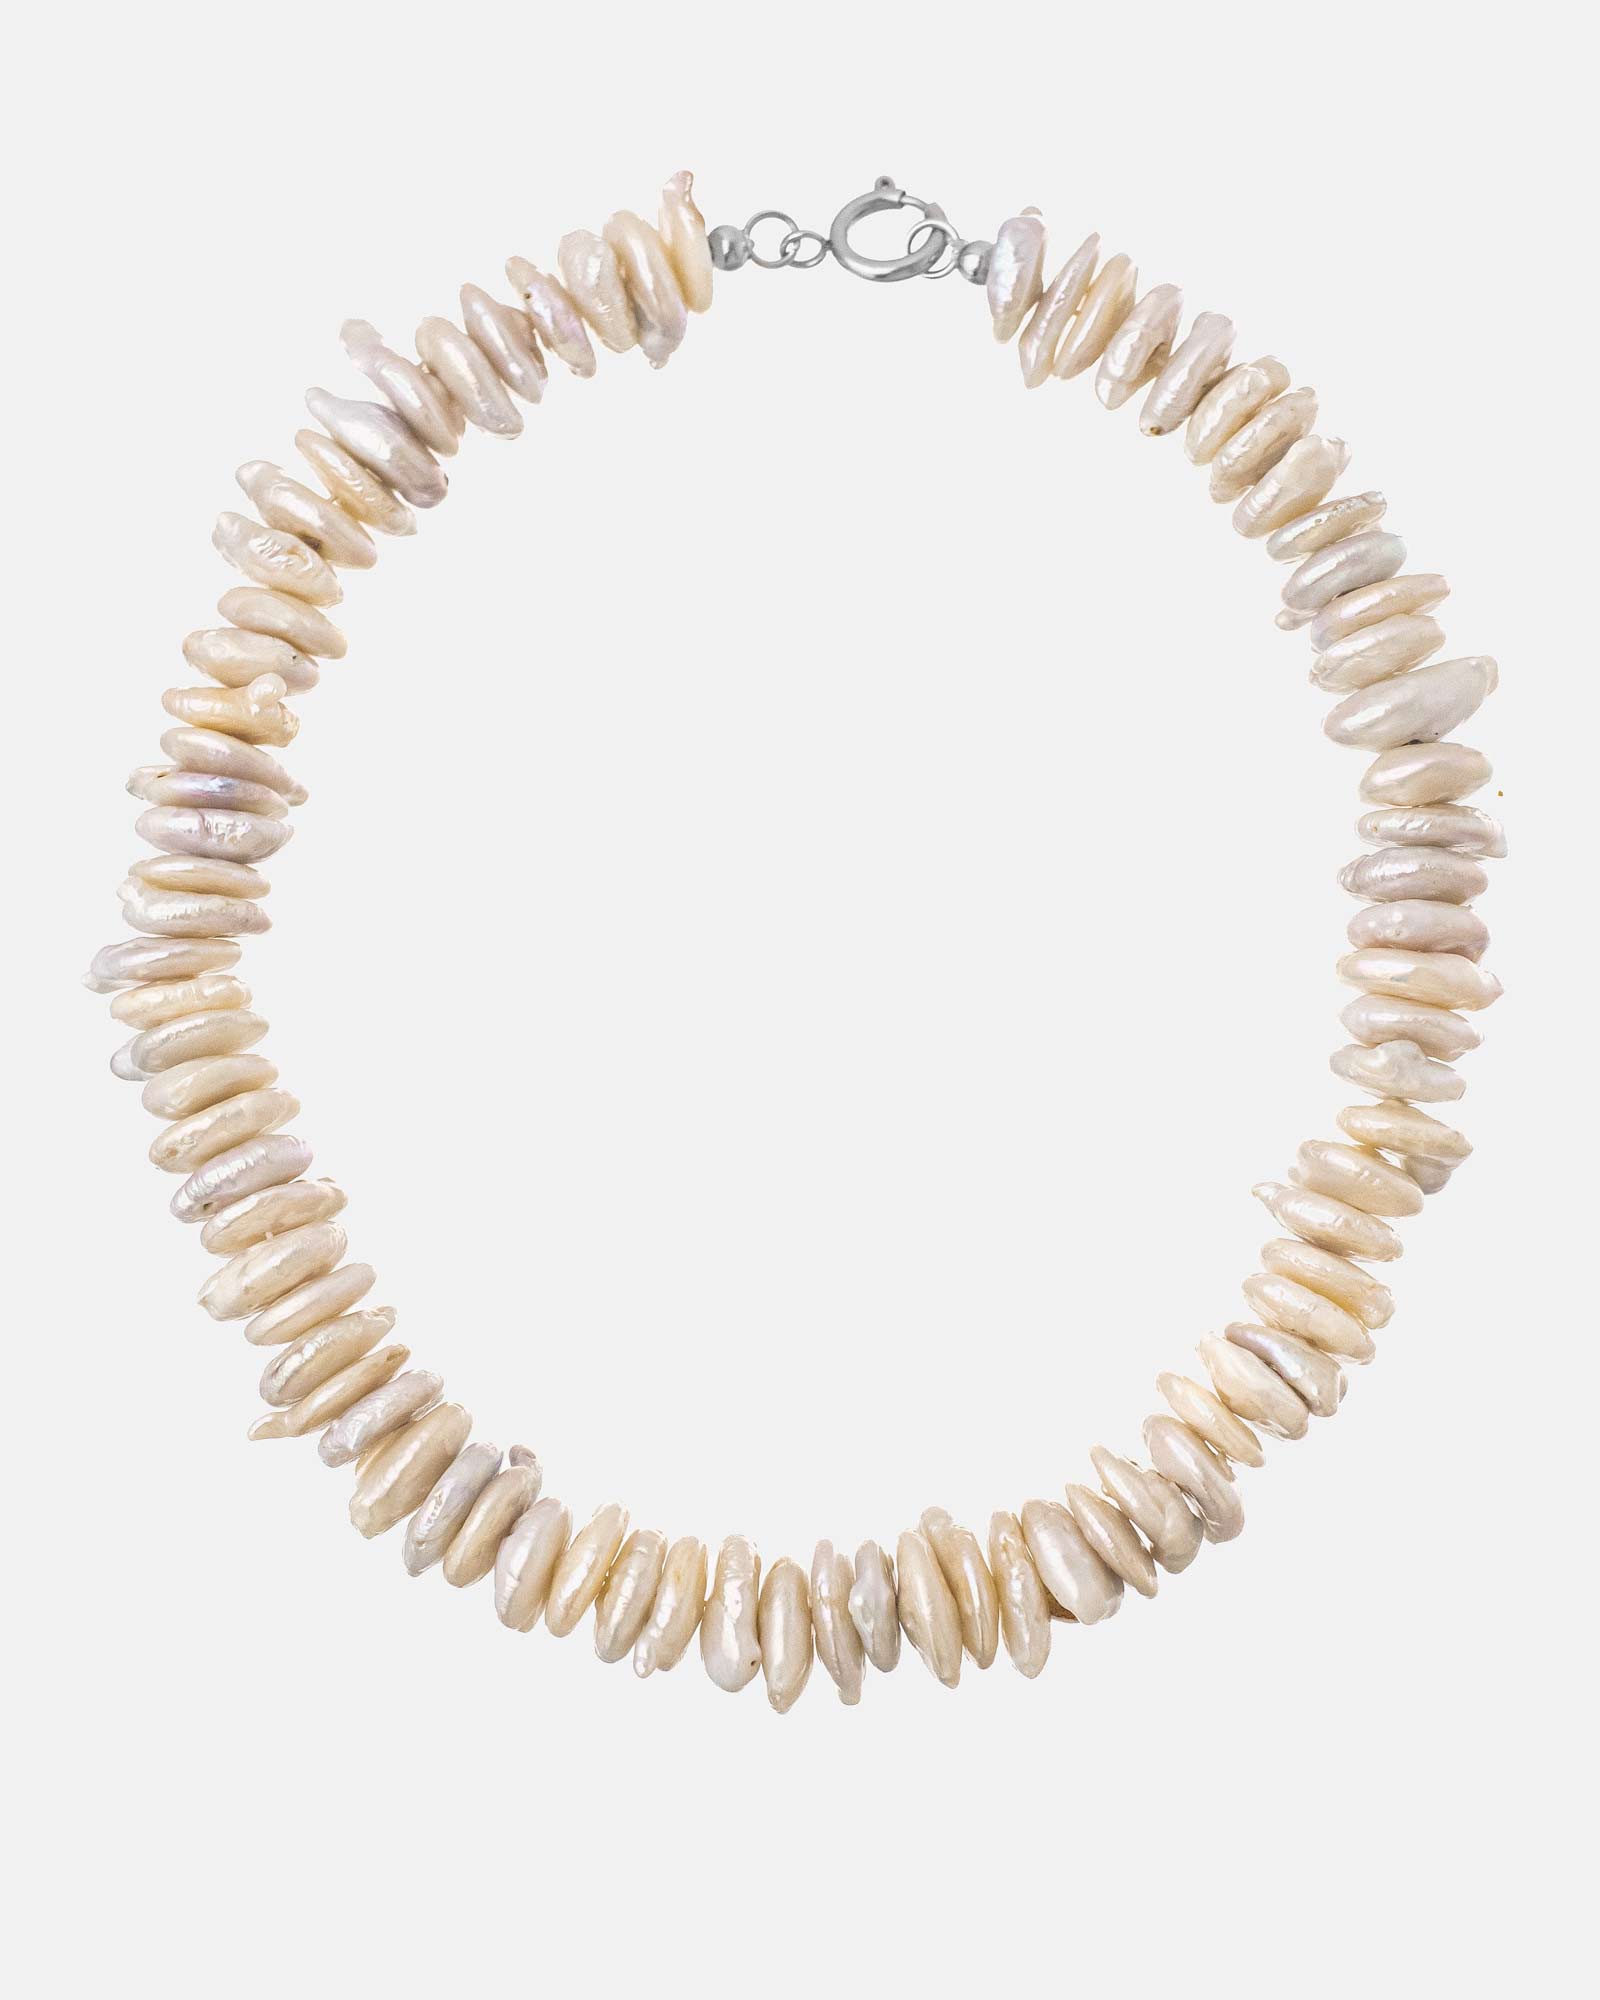 Flat Pearl Necklace